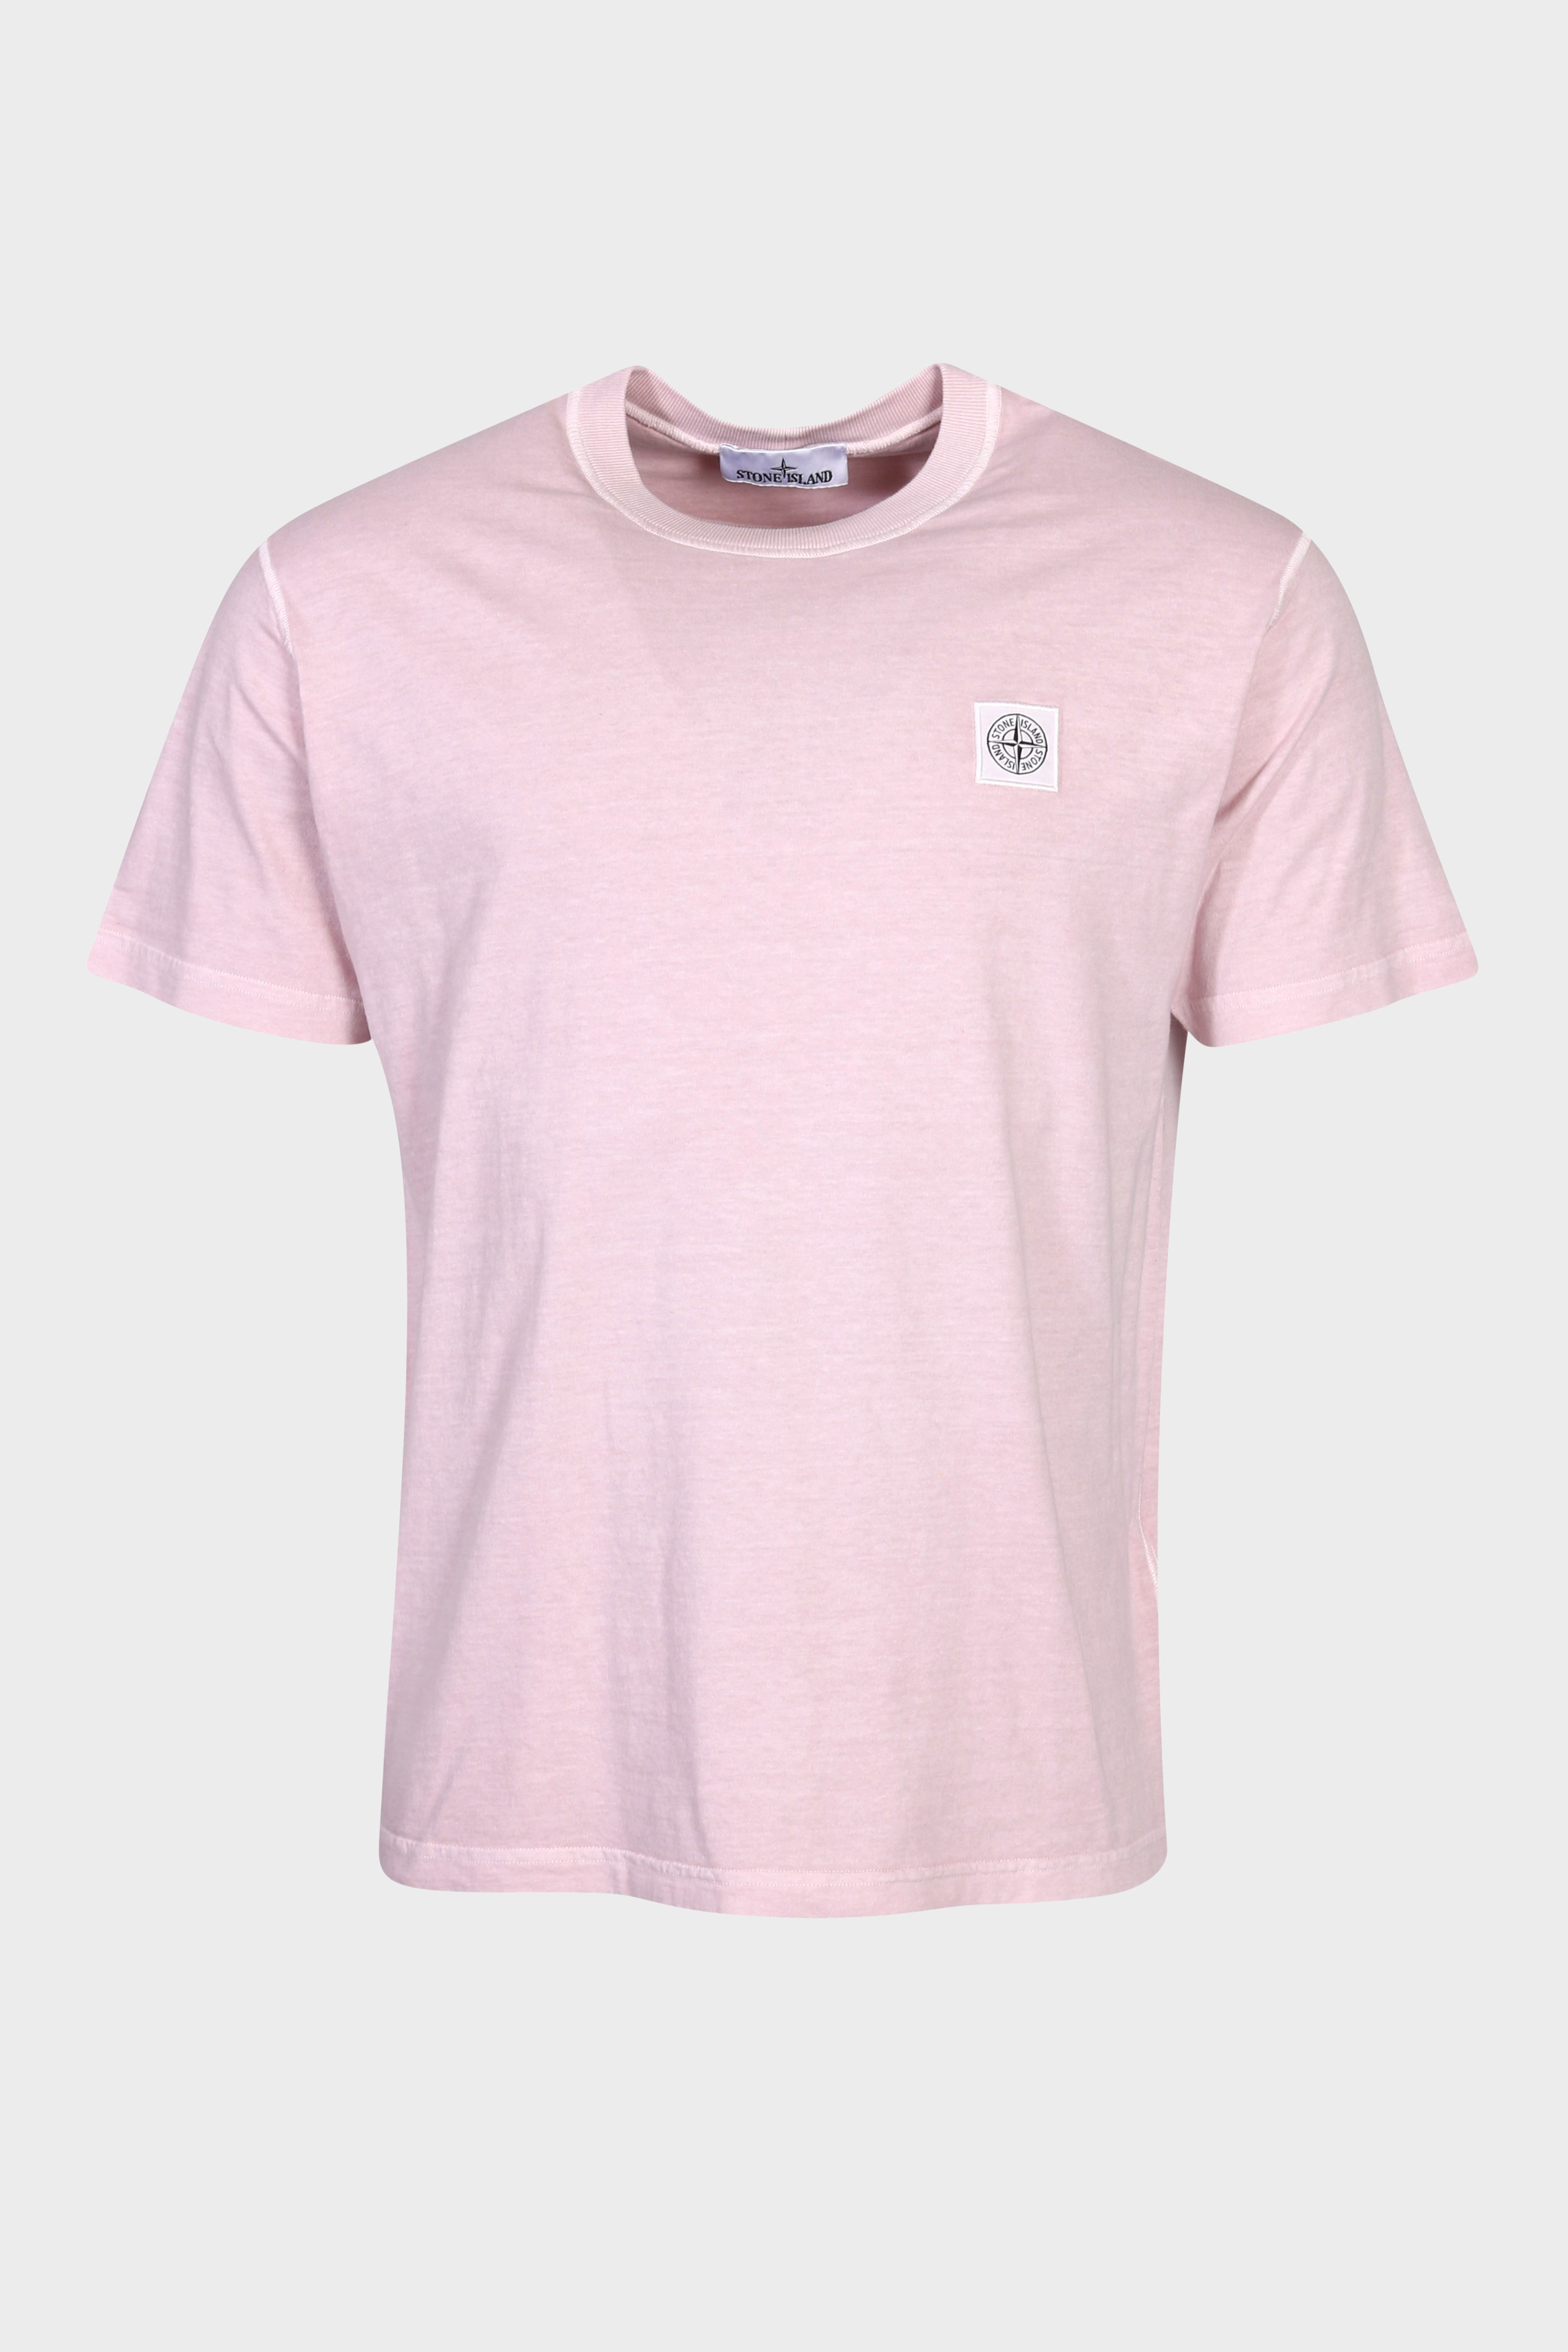 STONE ISLAND T-Shirt in Washed Light Pink M